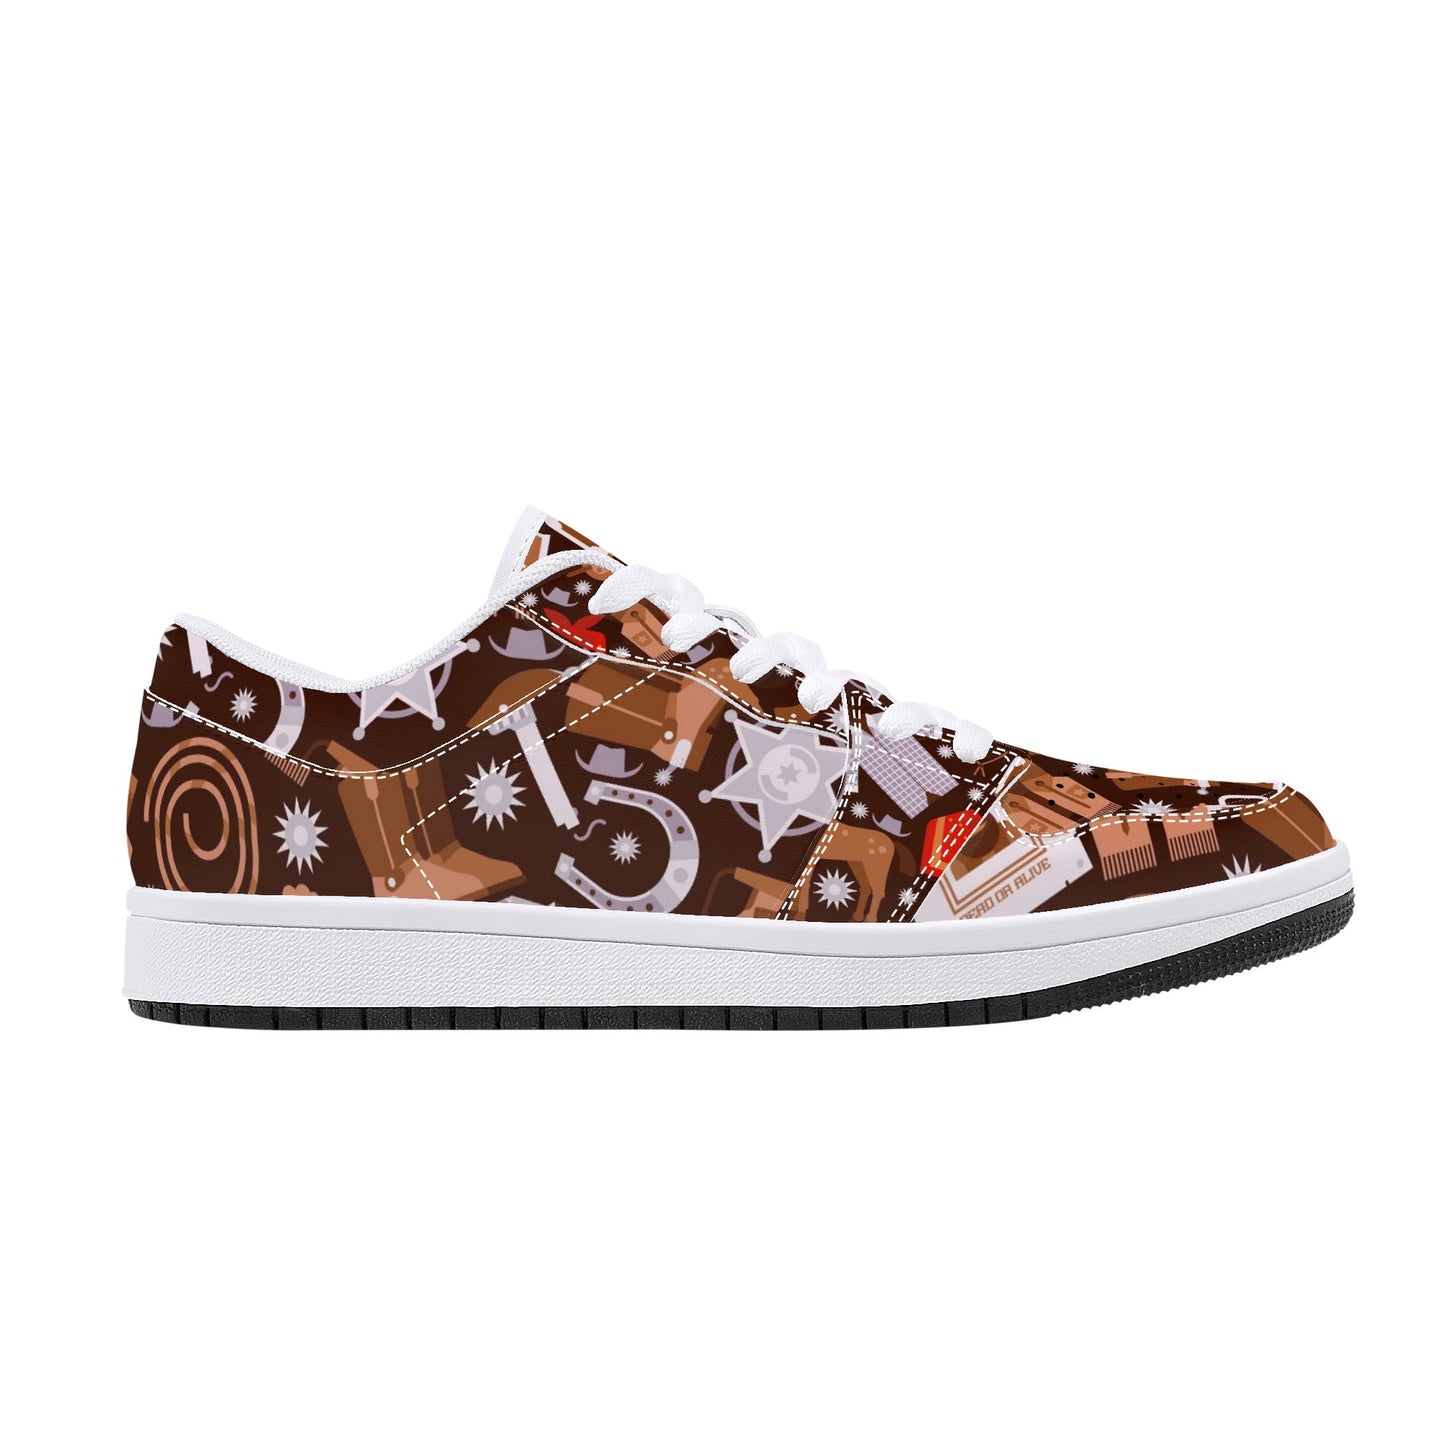 Designer Low Top Leather Sneakers -D15 X1 Colloid Colors 